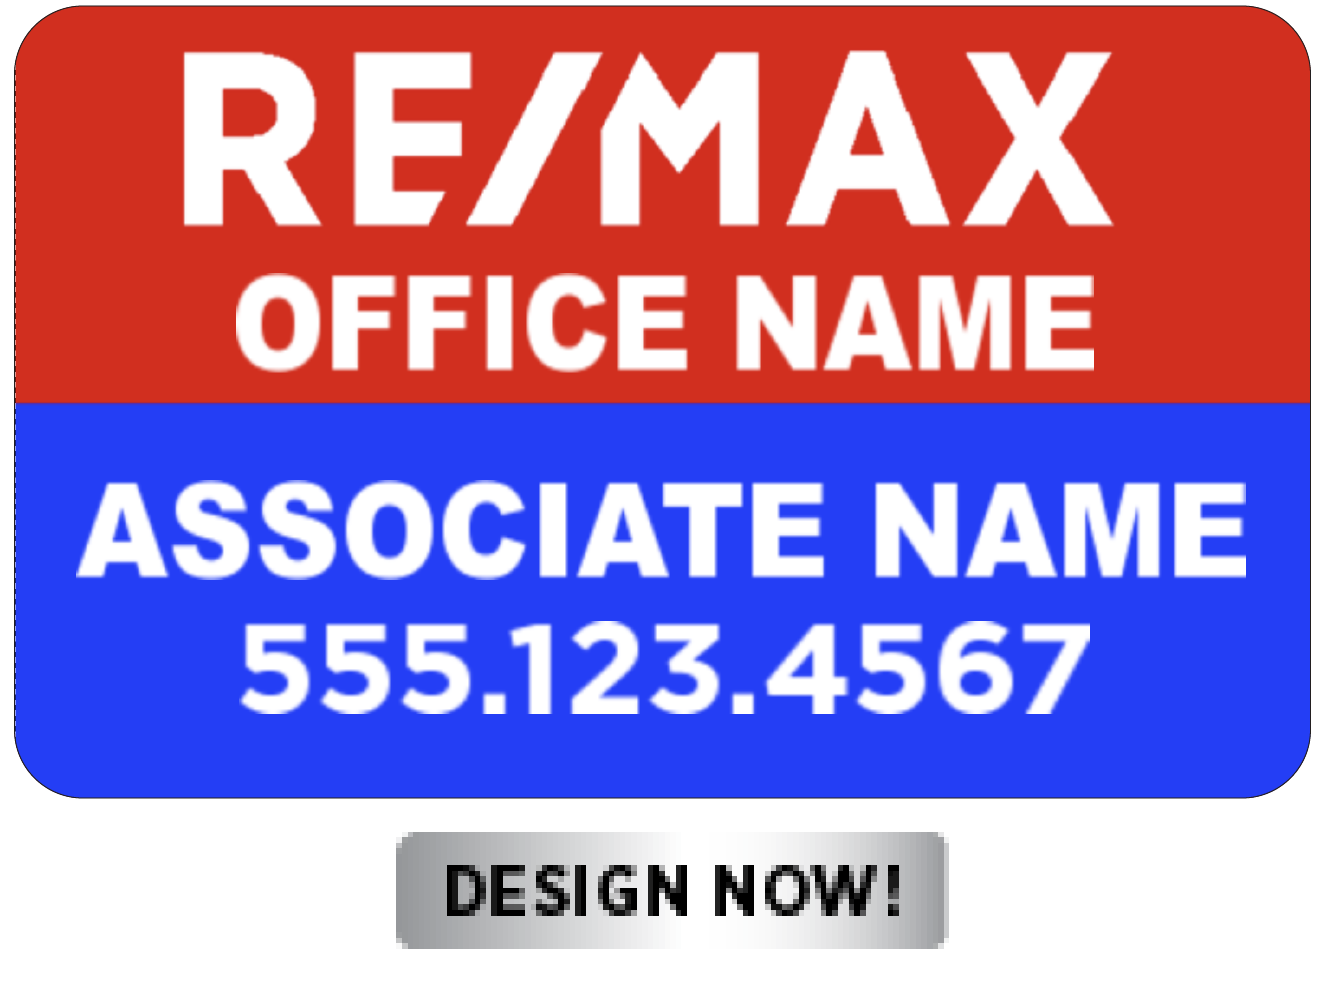 remax11x18magnetredbluerevised.png